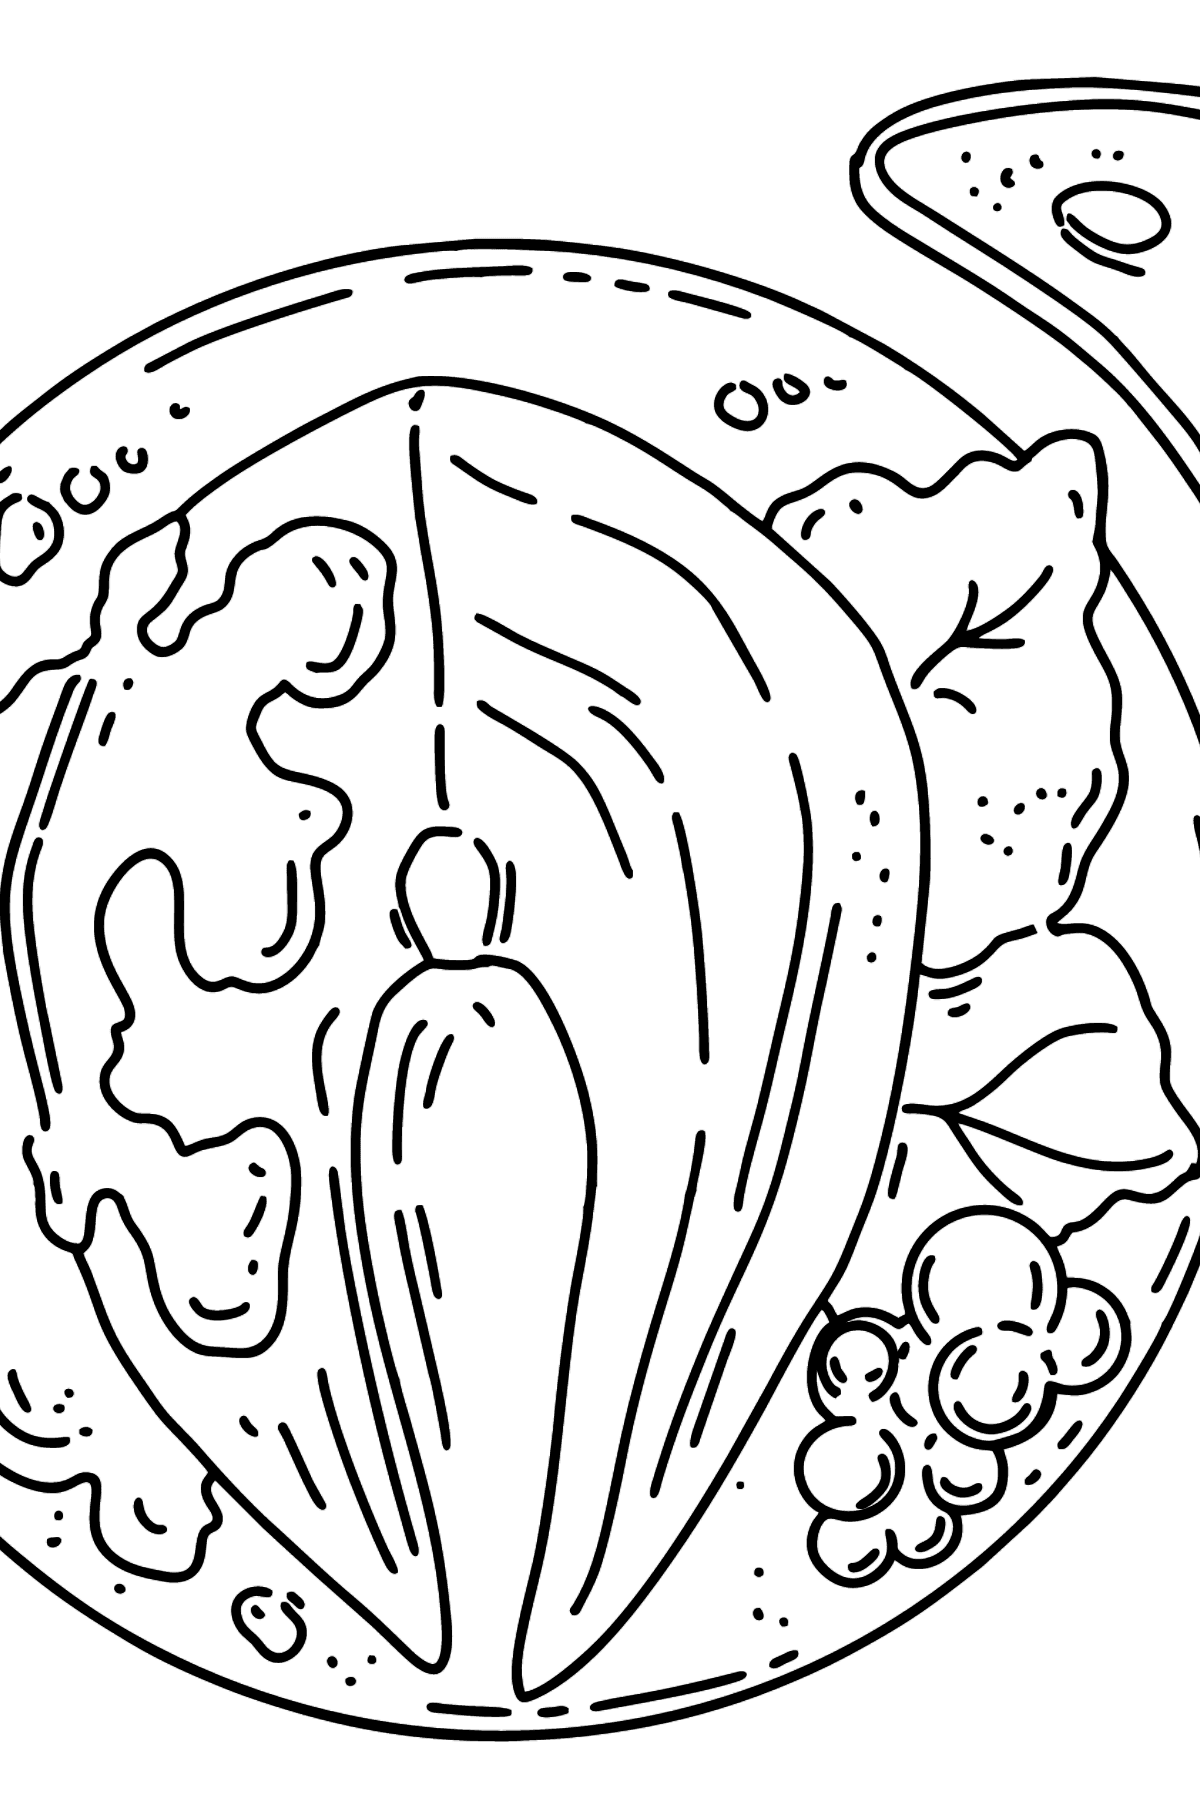 Dinner - Baked Trout coloring page - Coloring Pages for Kids